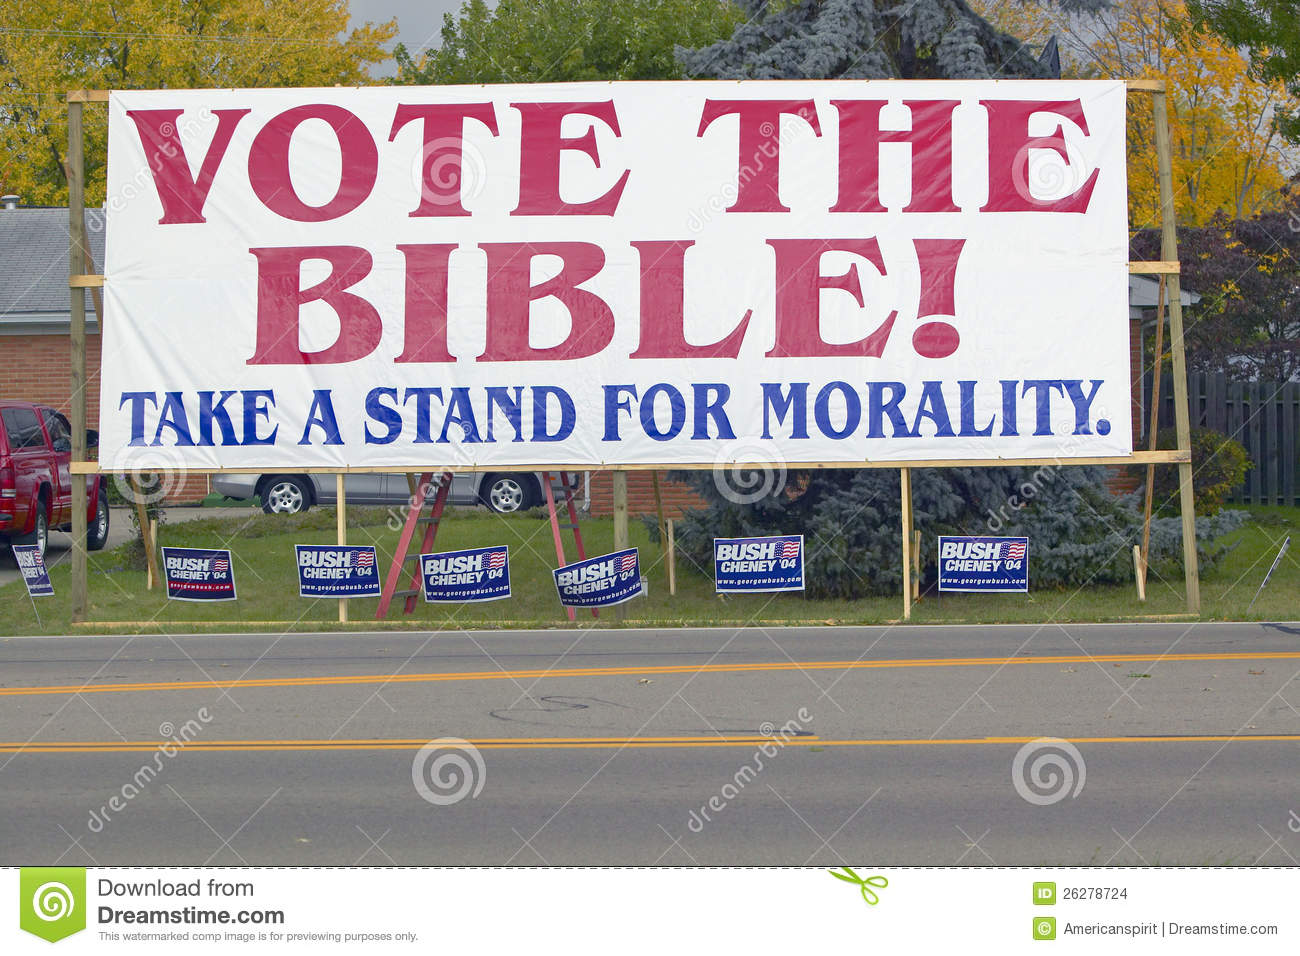 Vote The Bible Election 2004 Campaign Sign In A Rural Southern Ohio